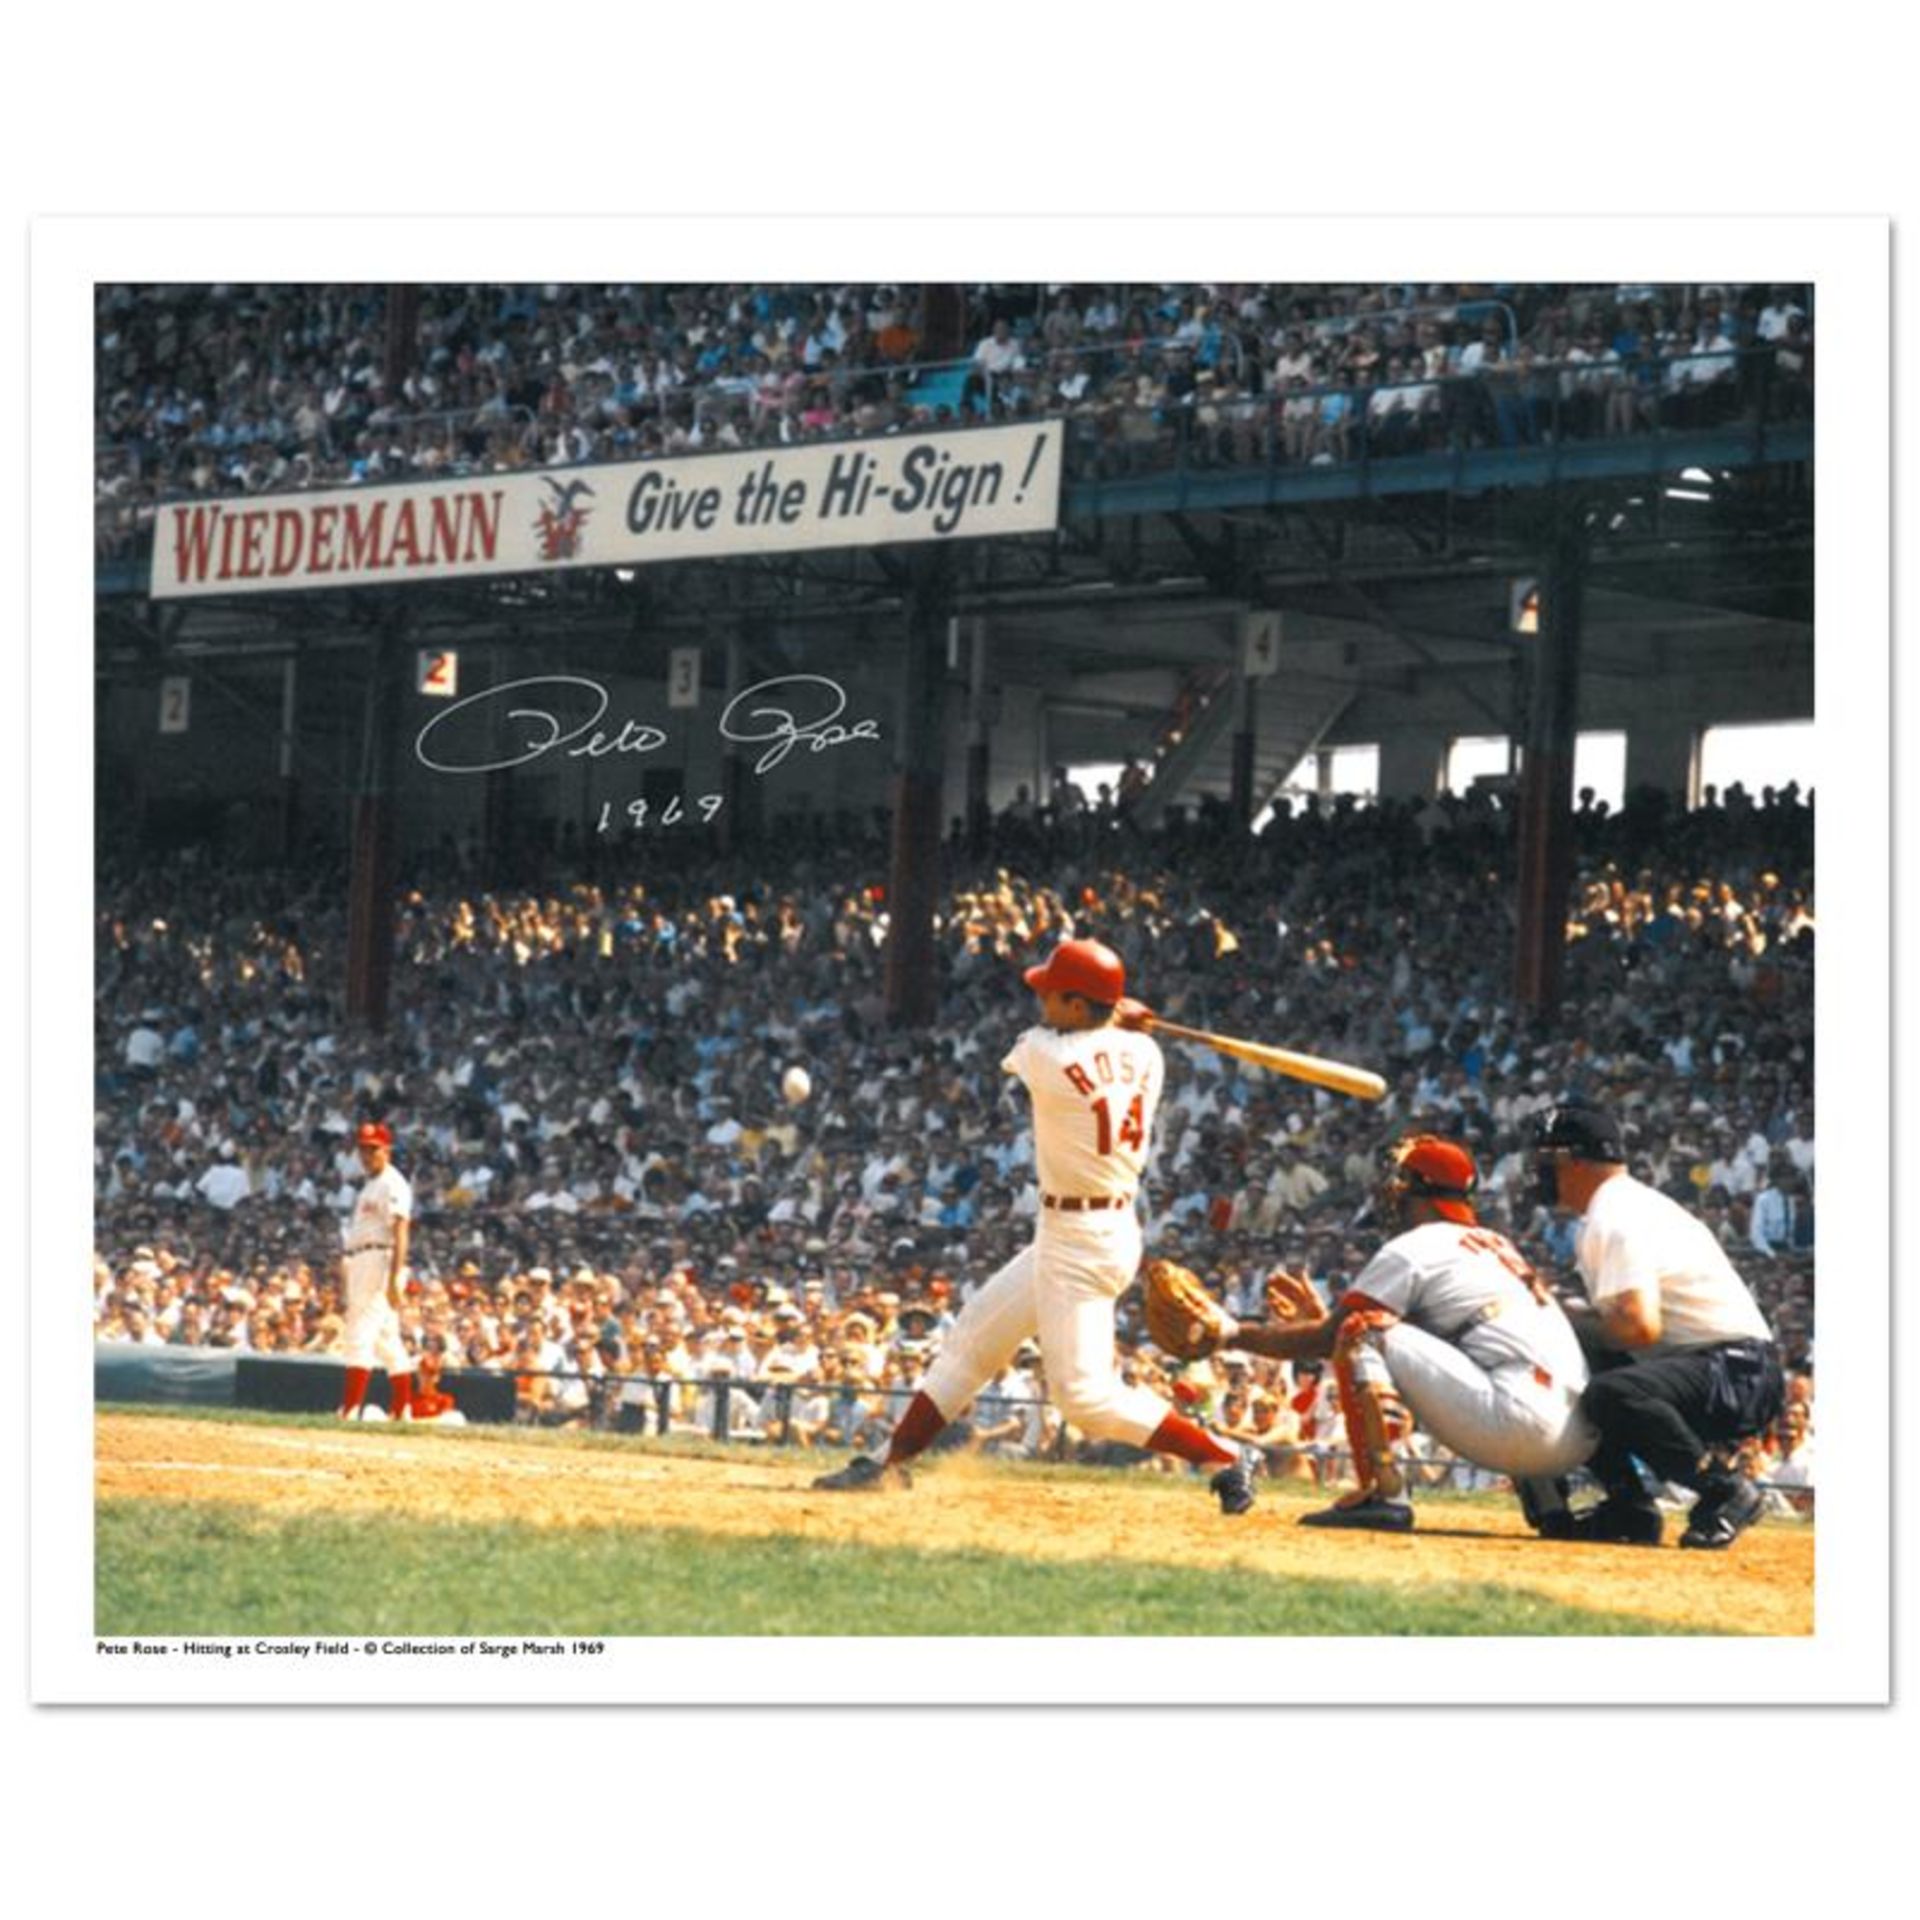 "Rose Hitting in Crosley Field" Archival Photograph Featuring Pete Rose Taken by